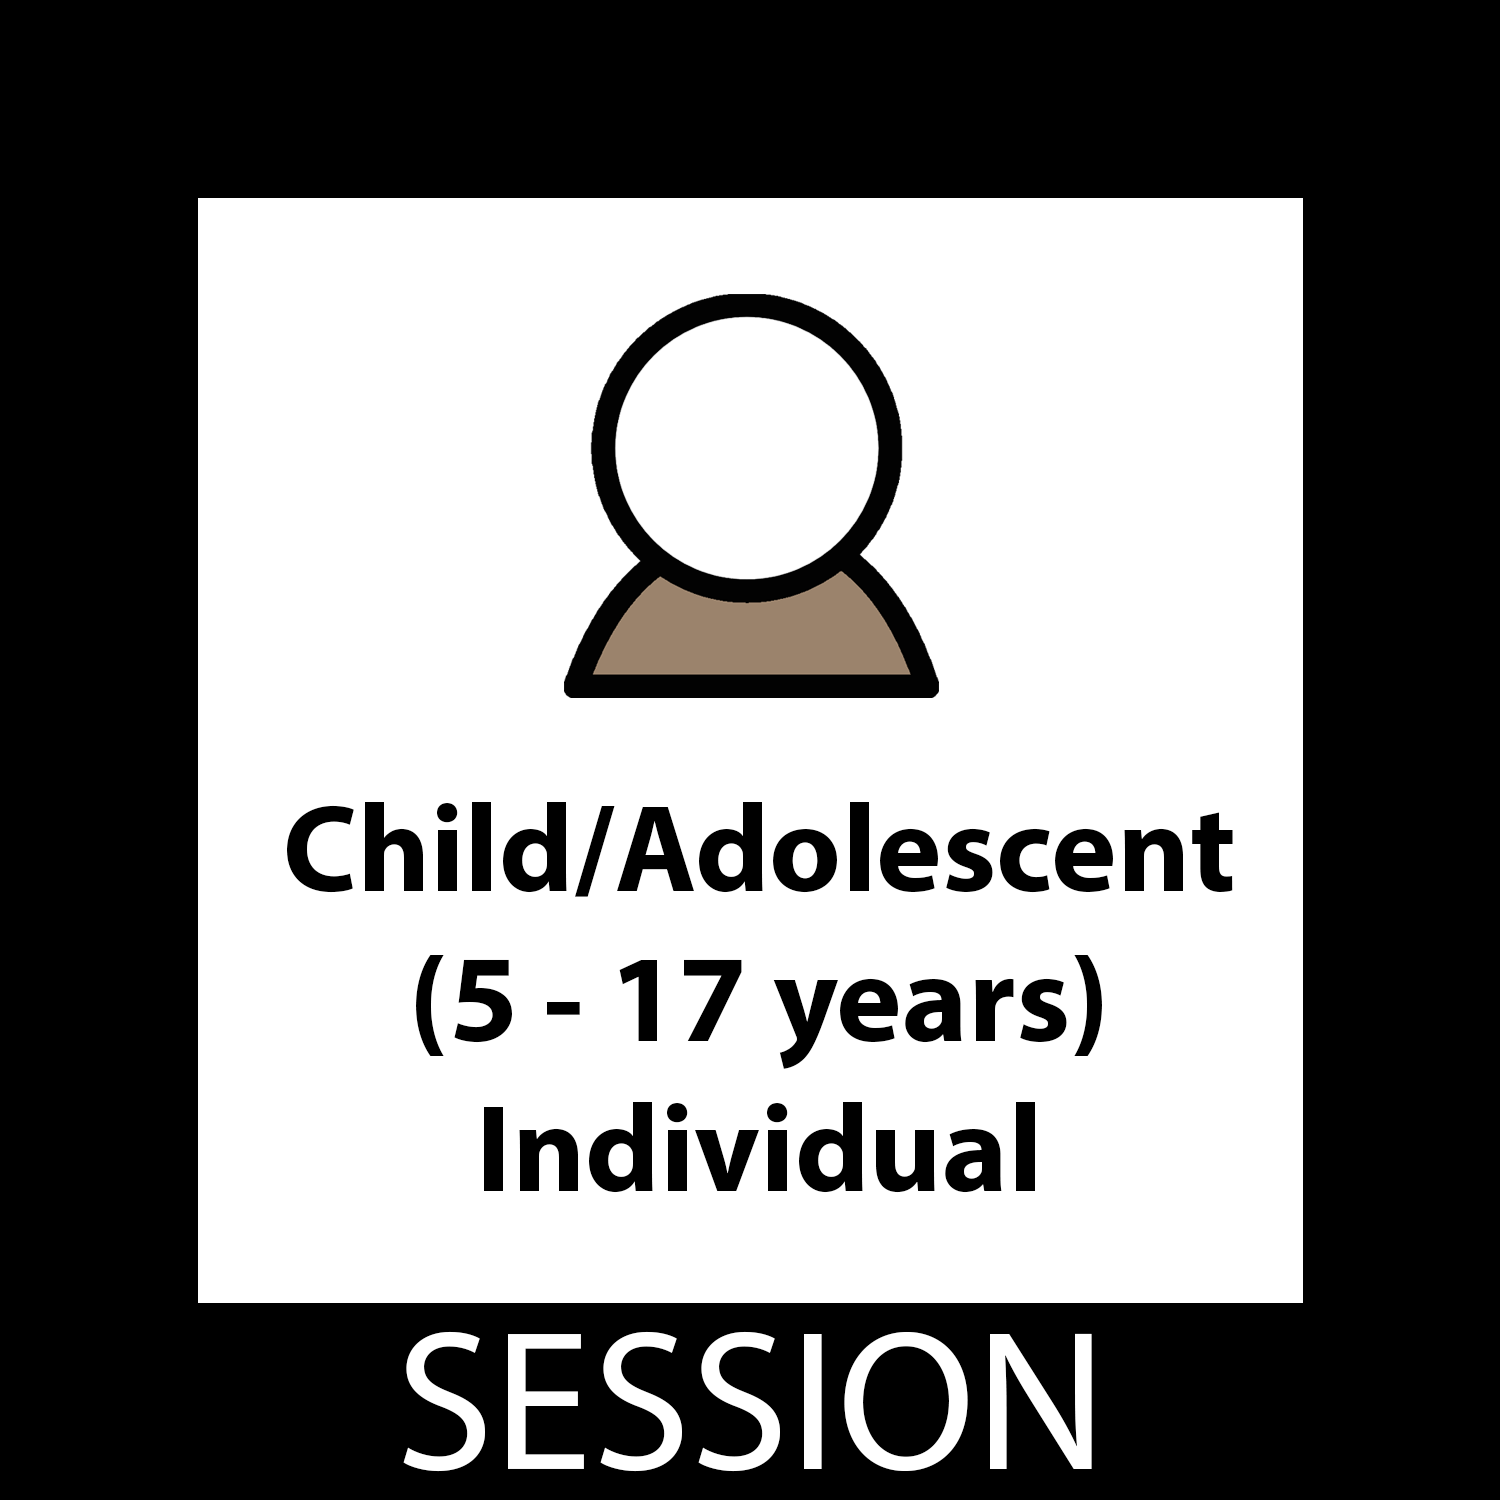 Child/Adolescent (5-17 Years of Age) Individual Session